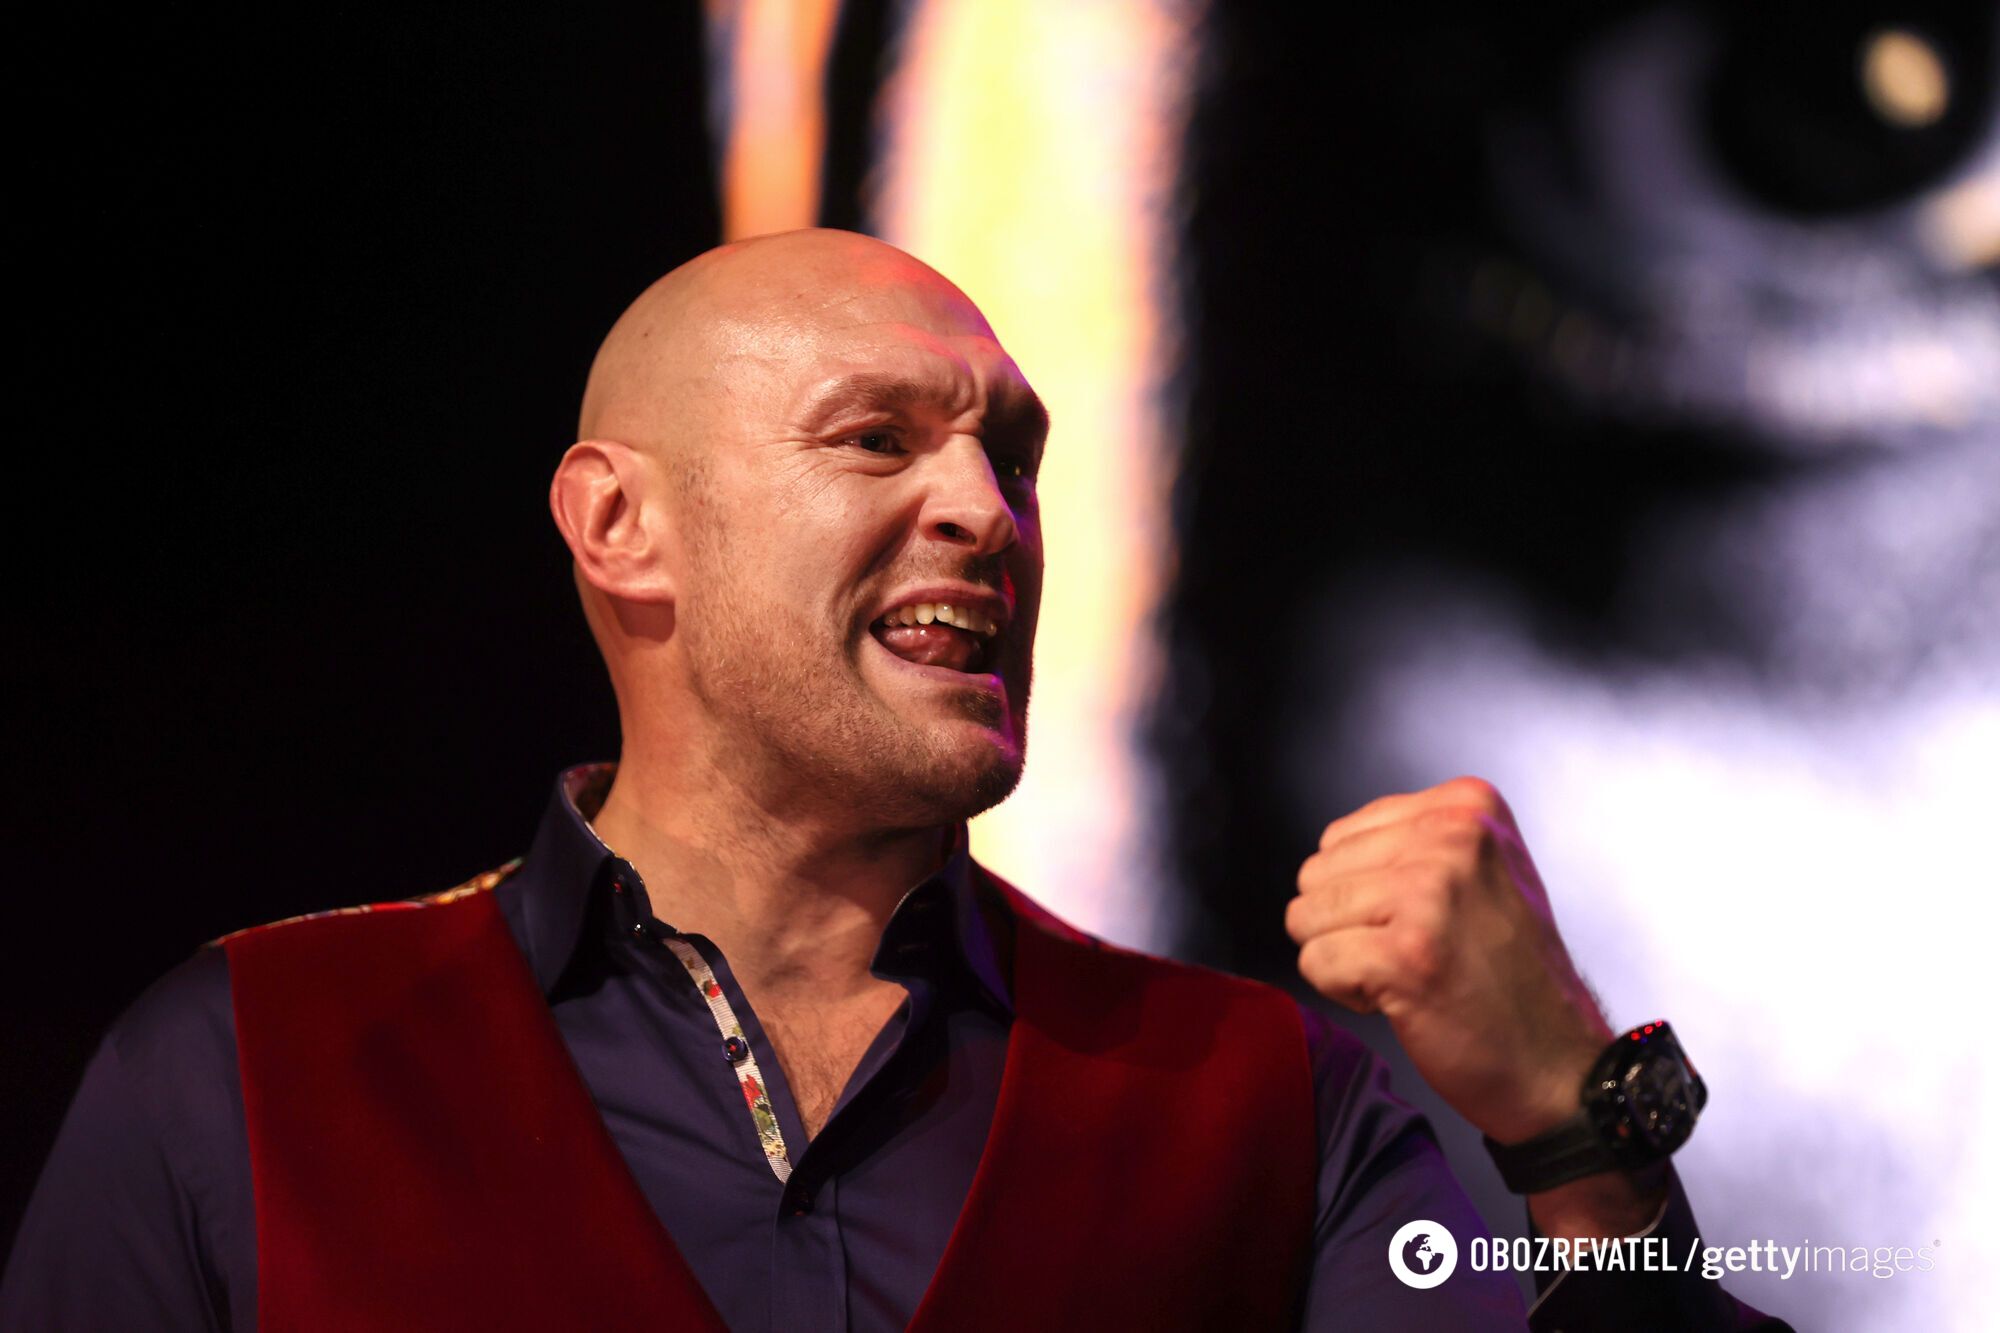 Tyson Fury said what he will do to Usyk in the fight